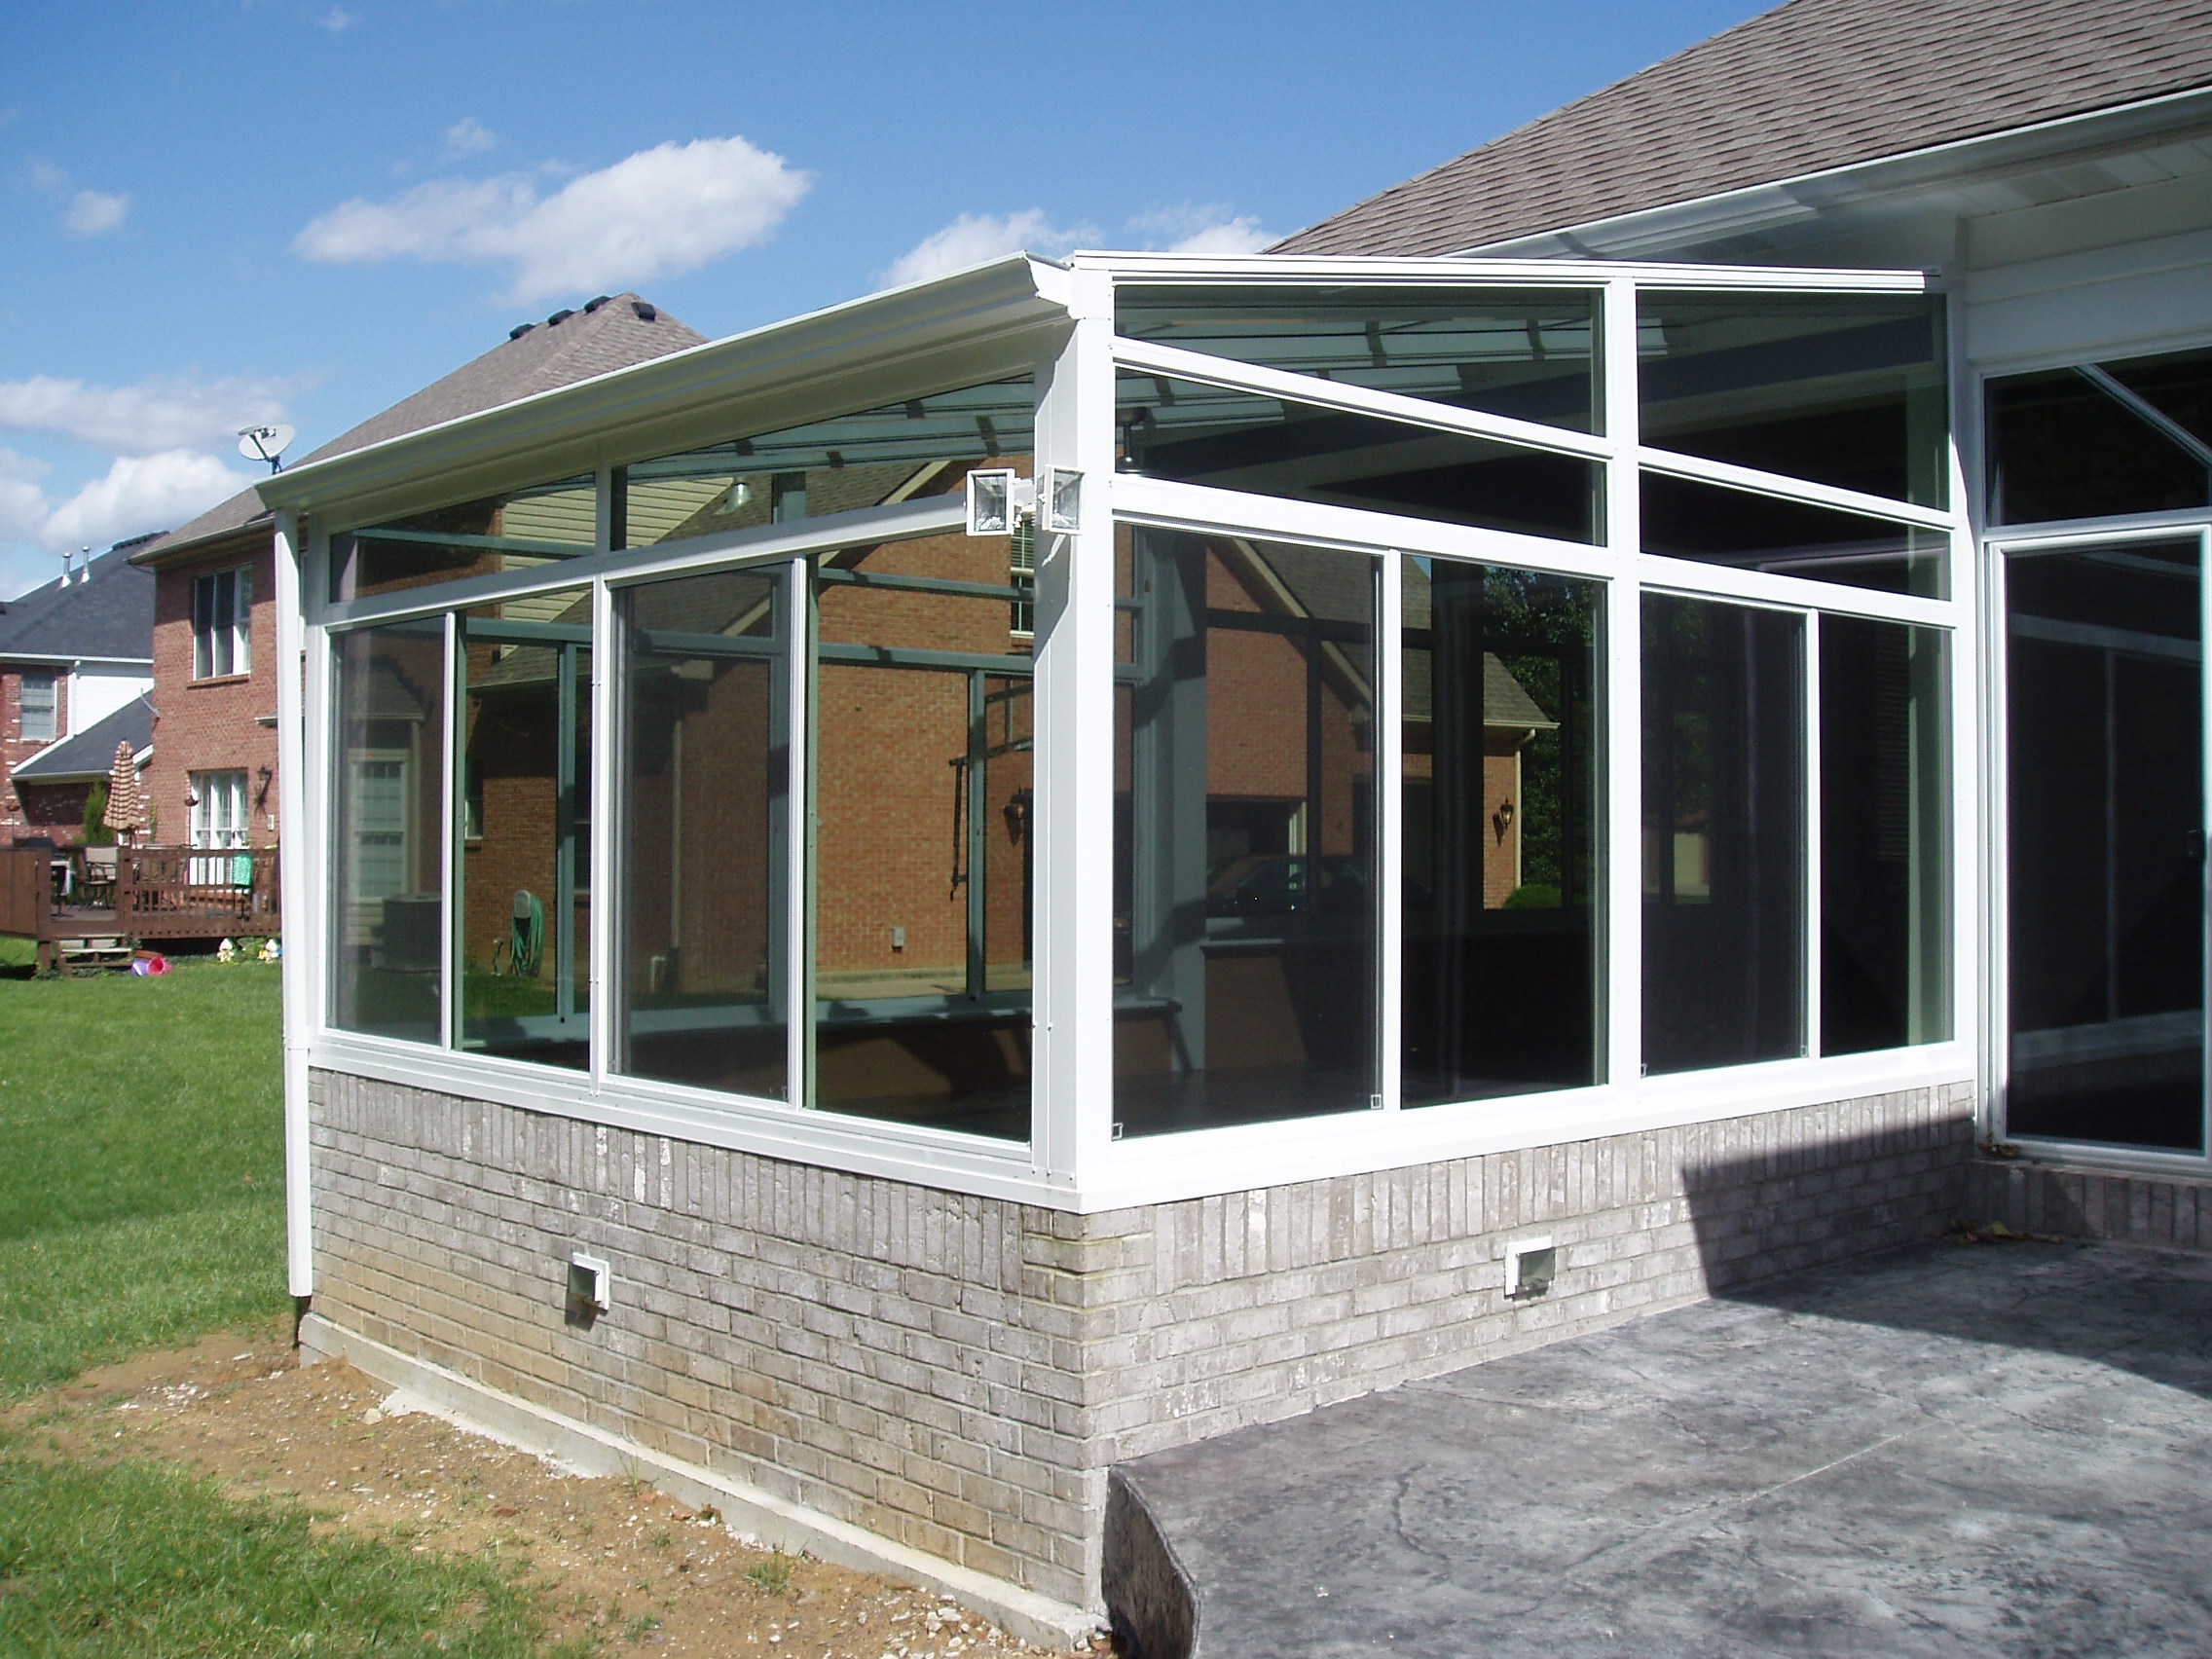 White interior and exterior with glass trapezoids and transoms